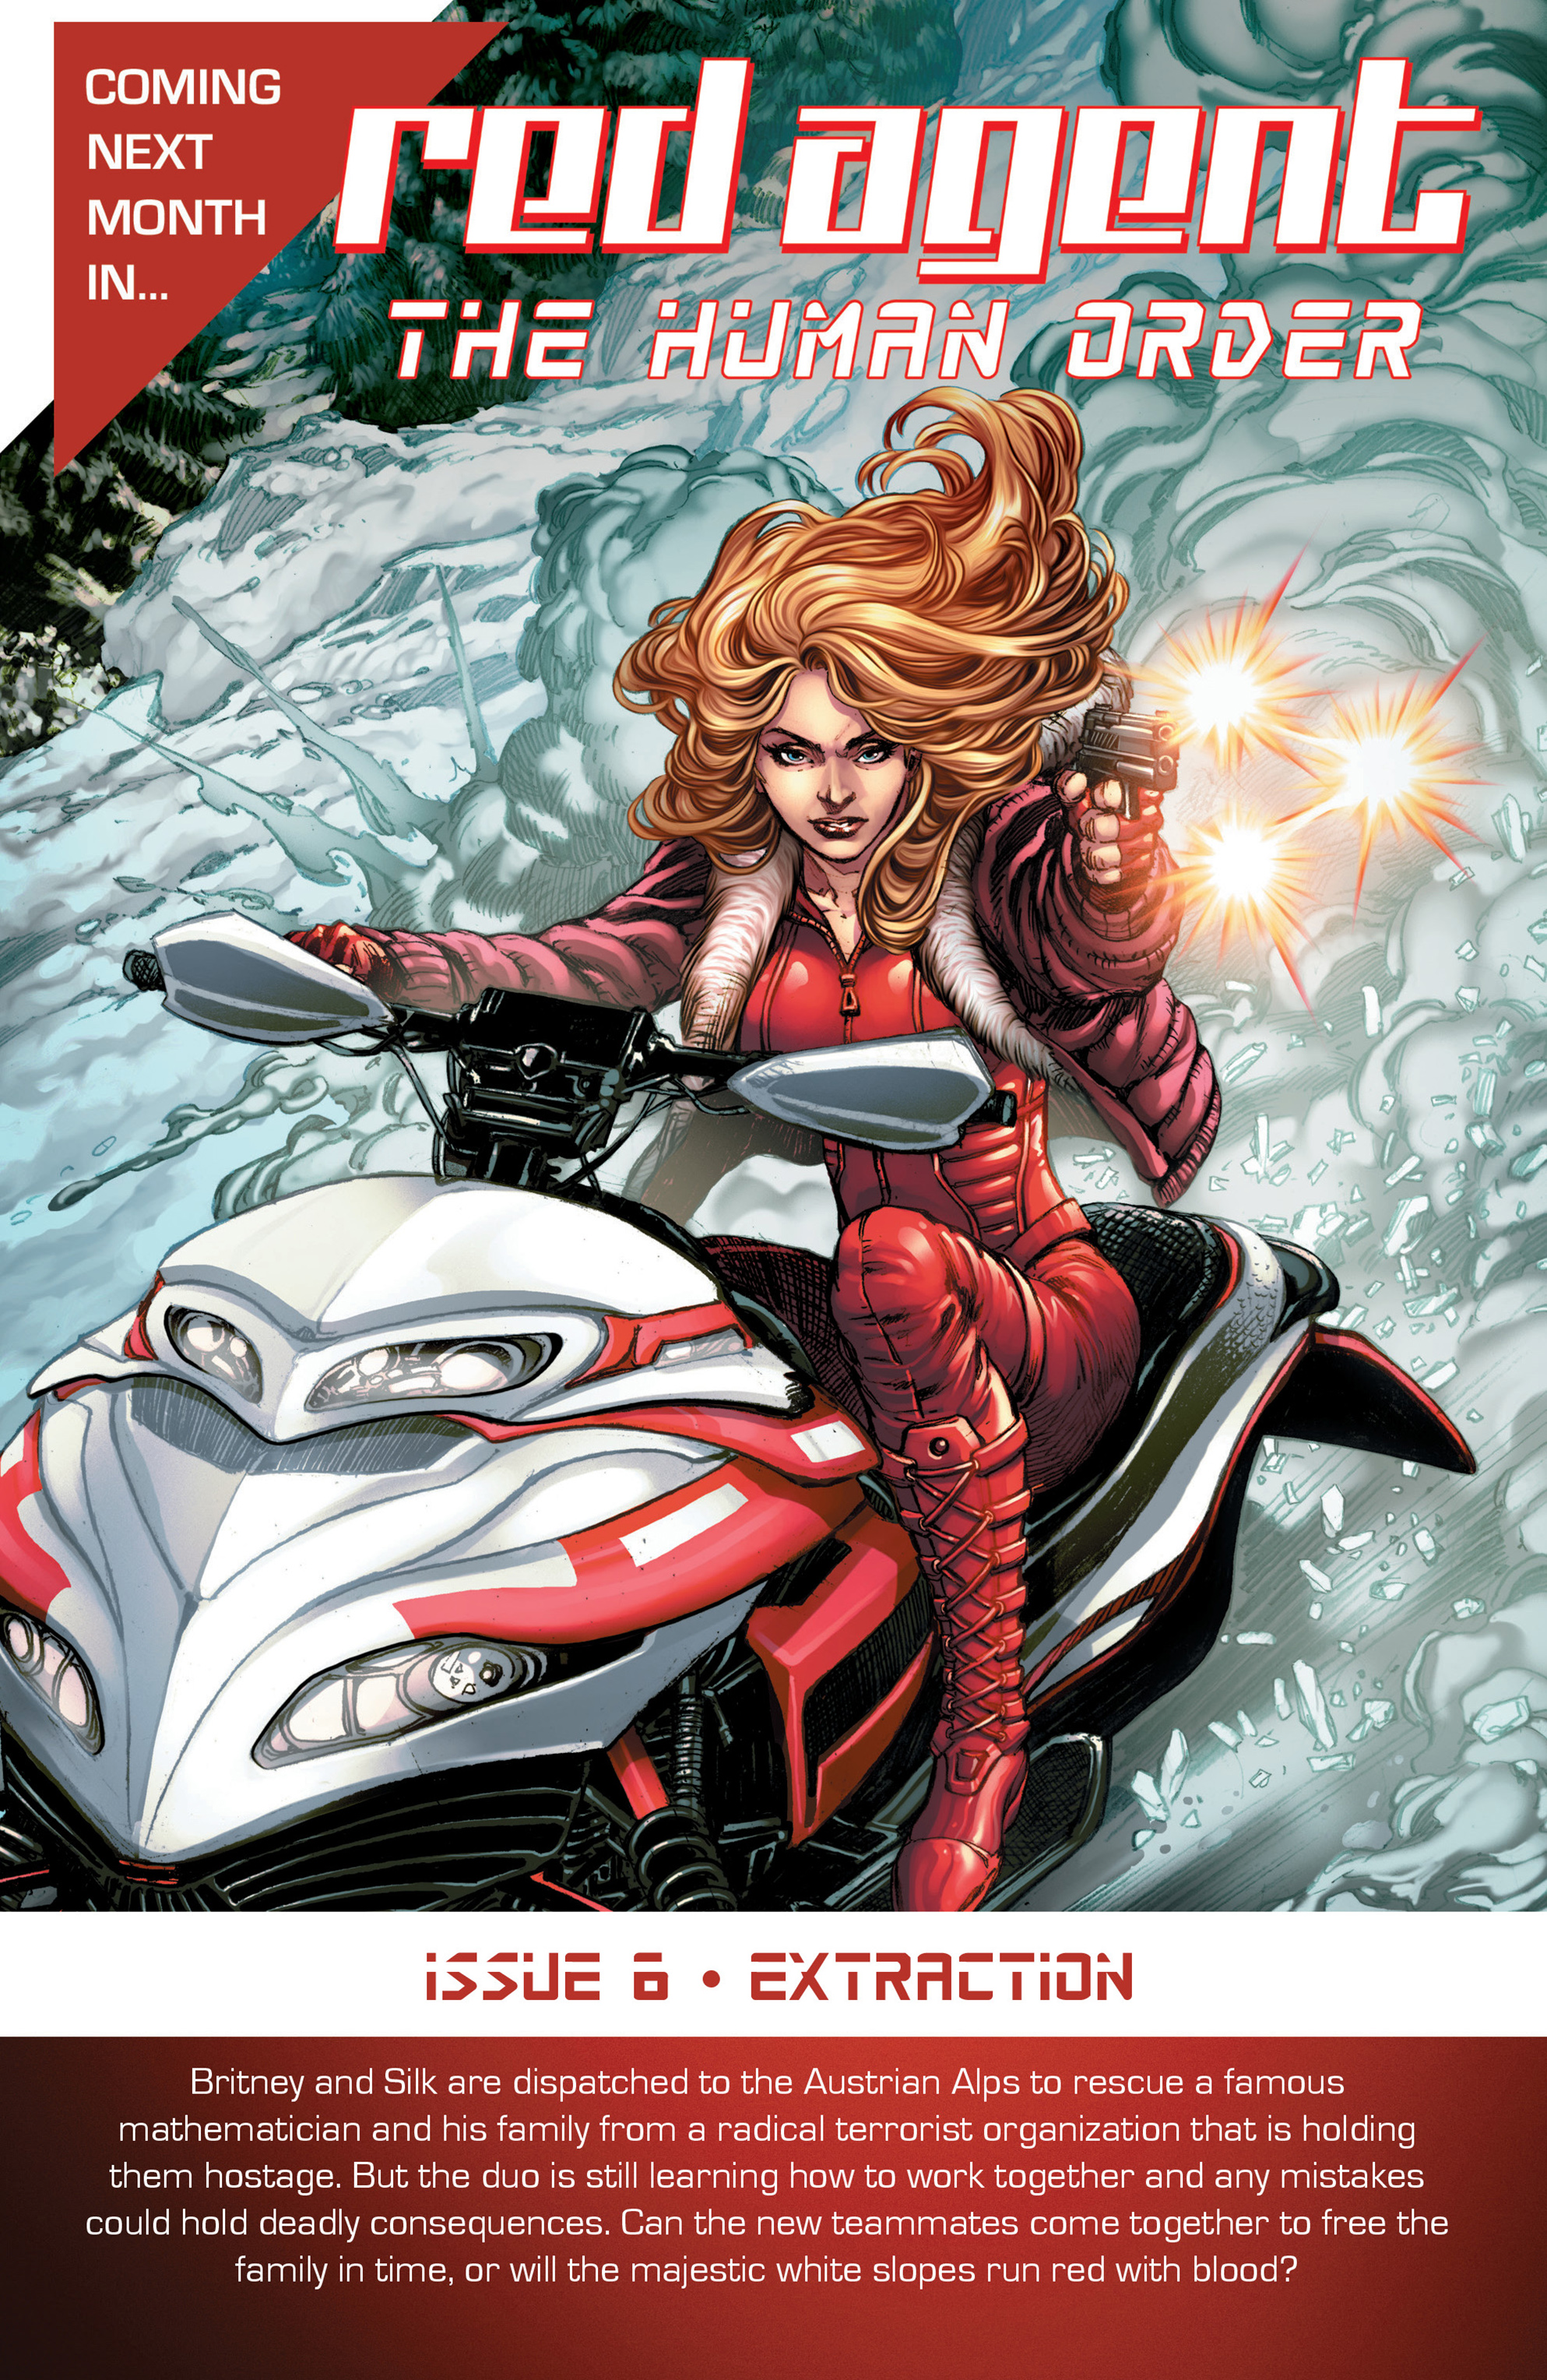 Read online Grimm Fairy Tales presents Red Agent: The Human Order comic -  Issue #5 - 25